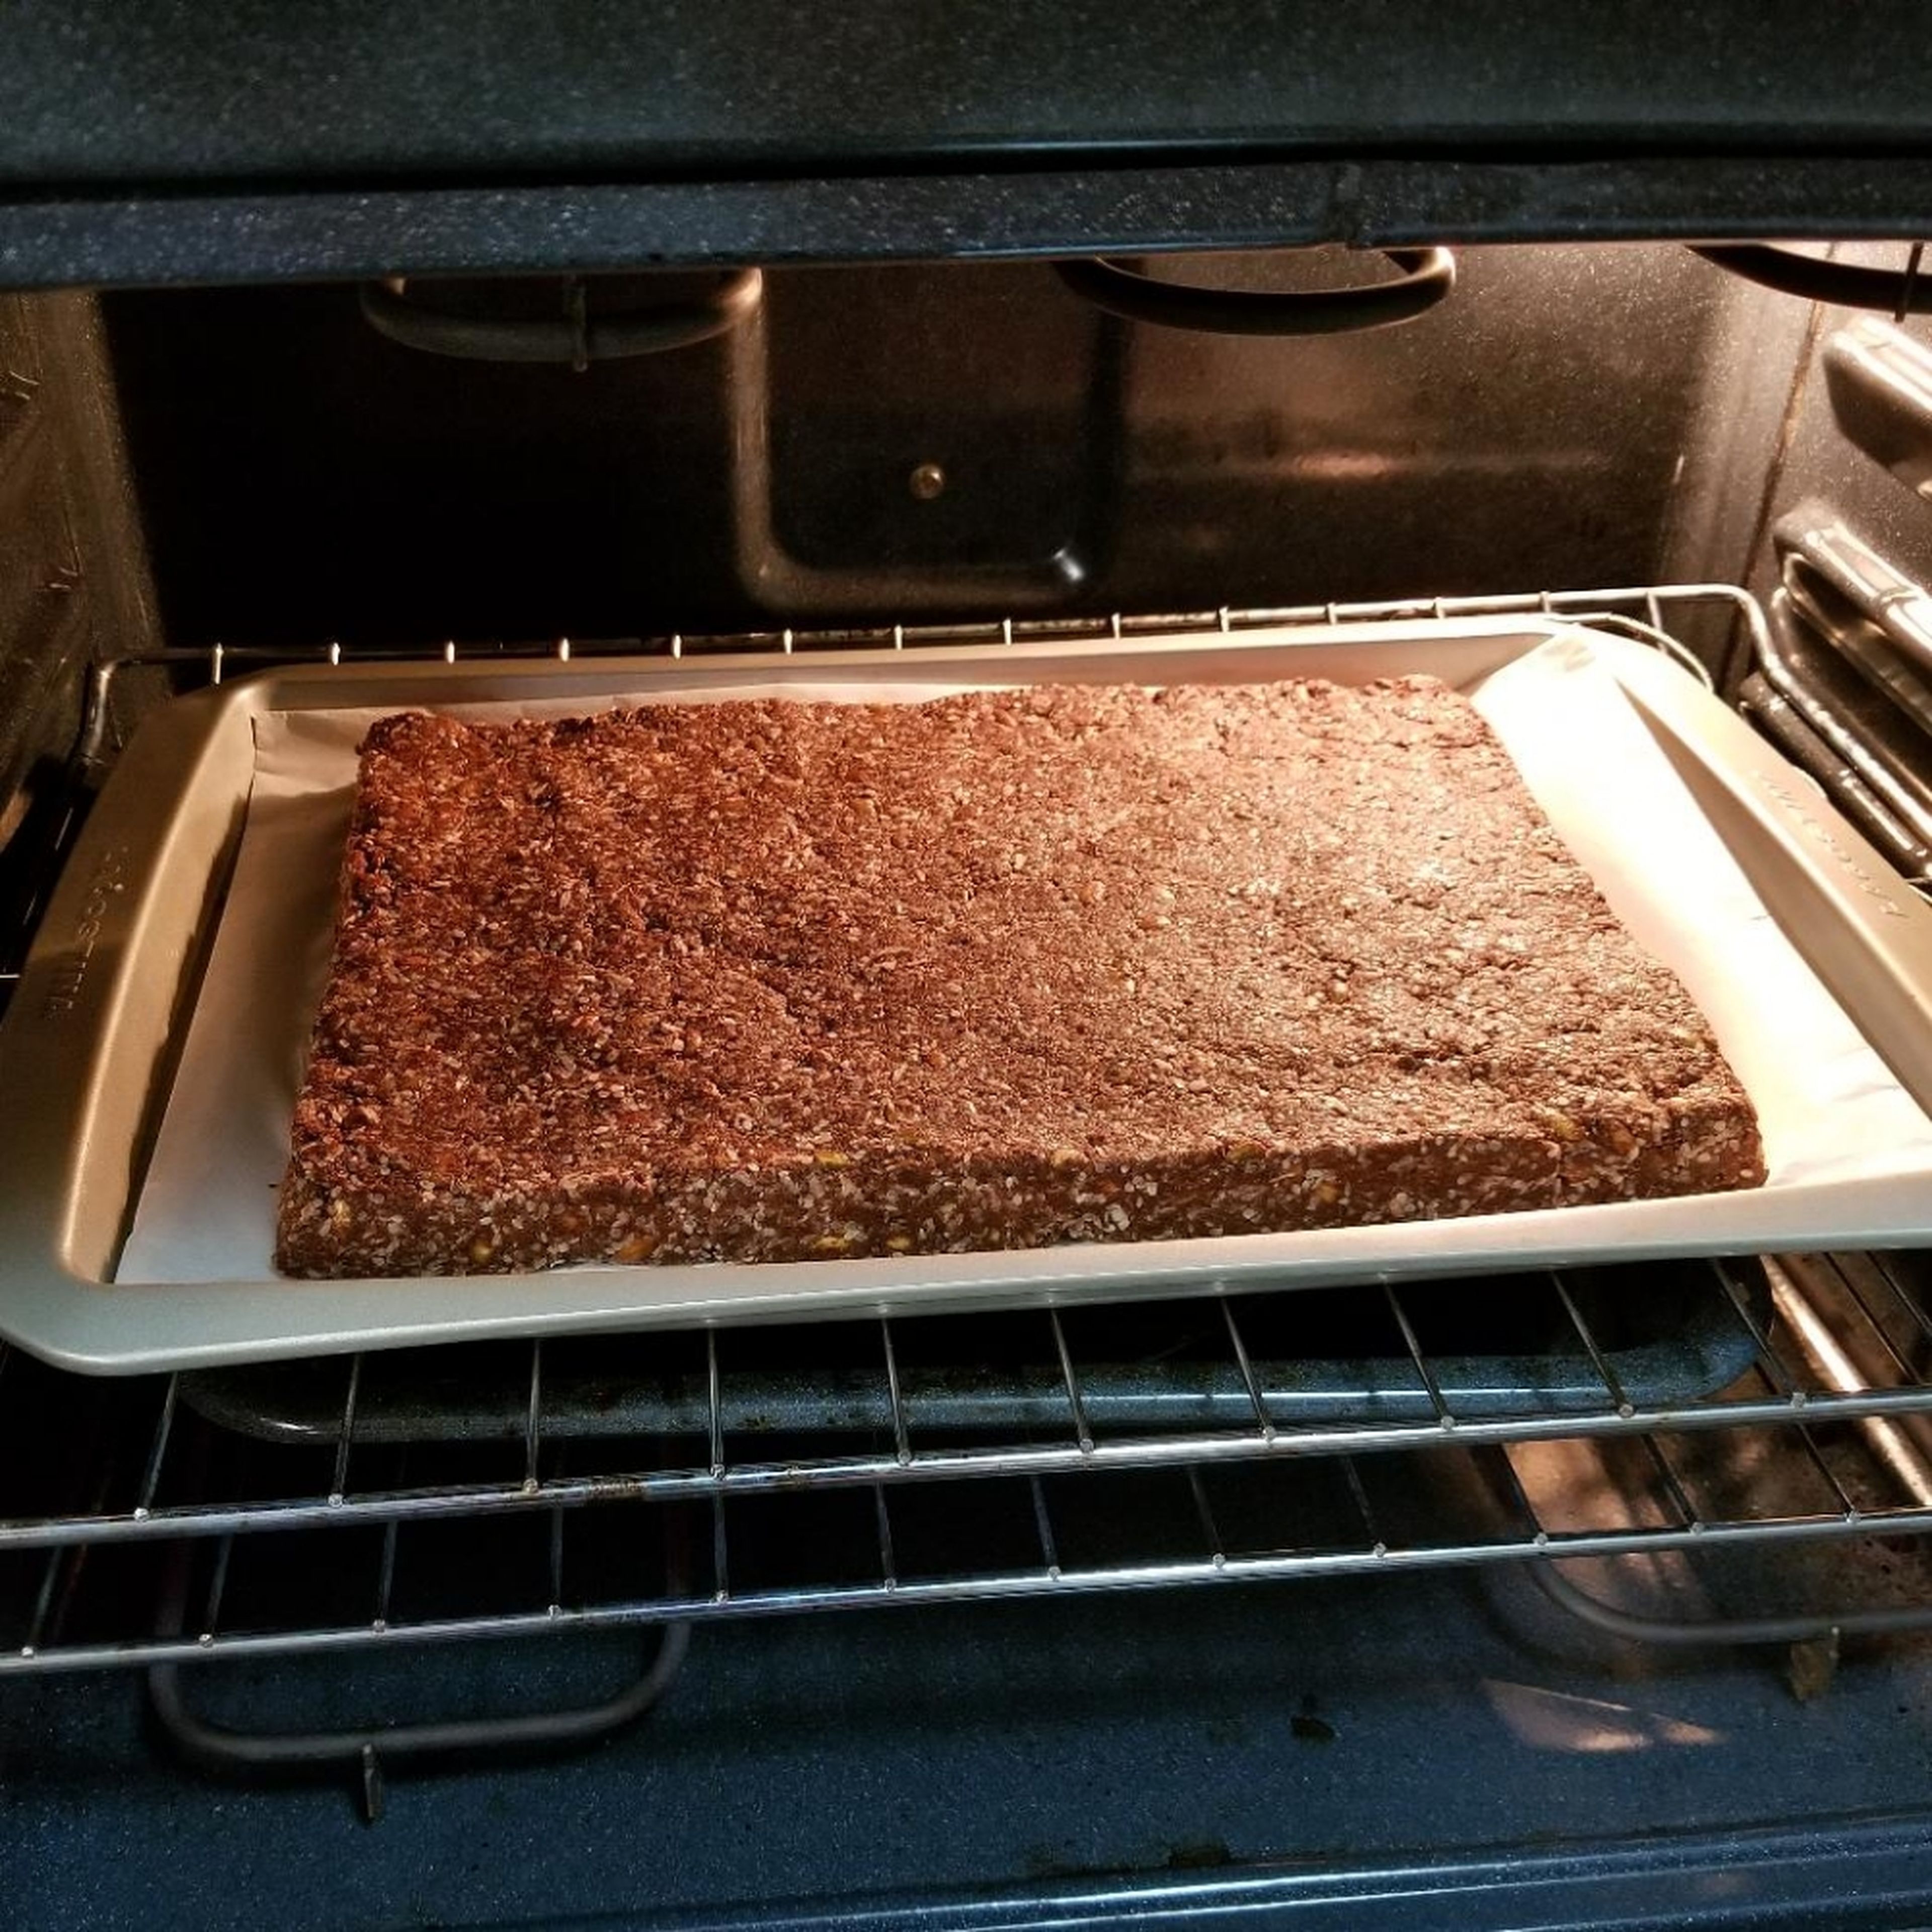 Bake in the oven for 15 min at 350 F. Note, do not overbake as it will dry out quickly!